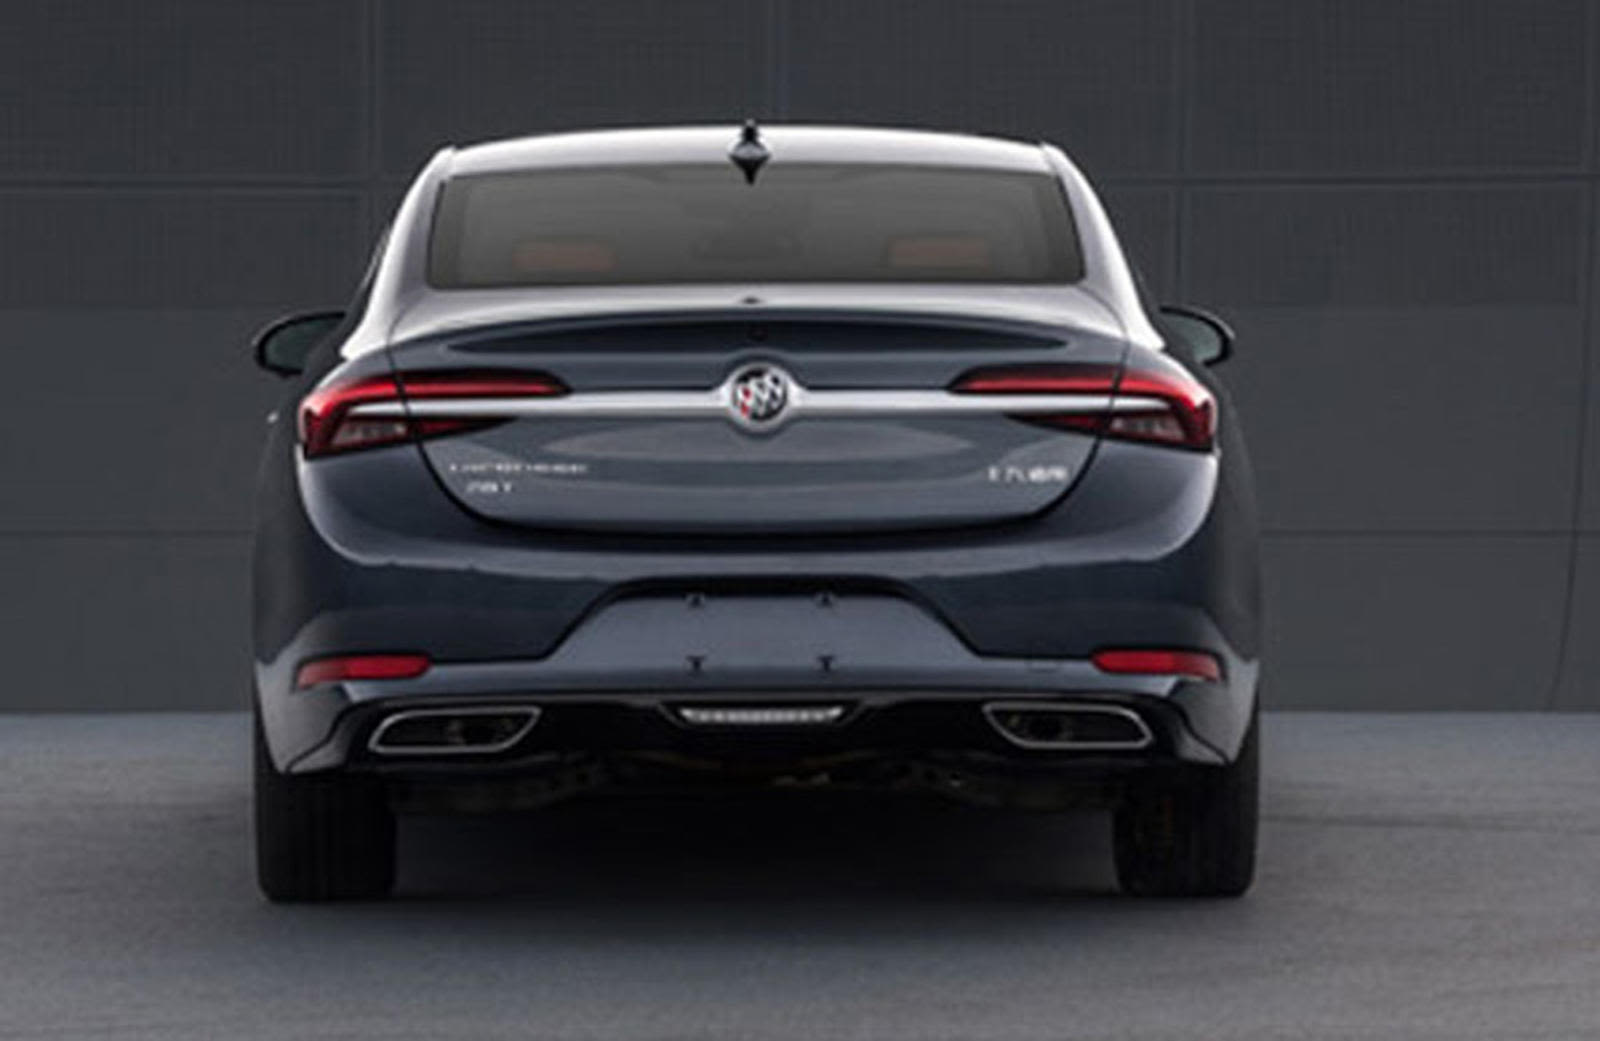 Illustration for article titled Heres the leaked 2020 Mazda 6...err Buick Lacrosse in case anyone cared